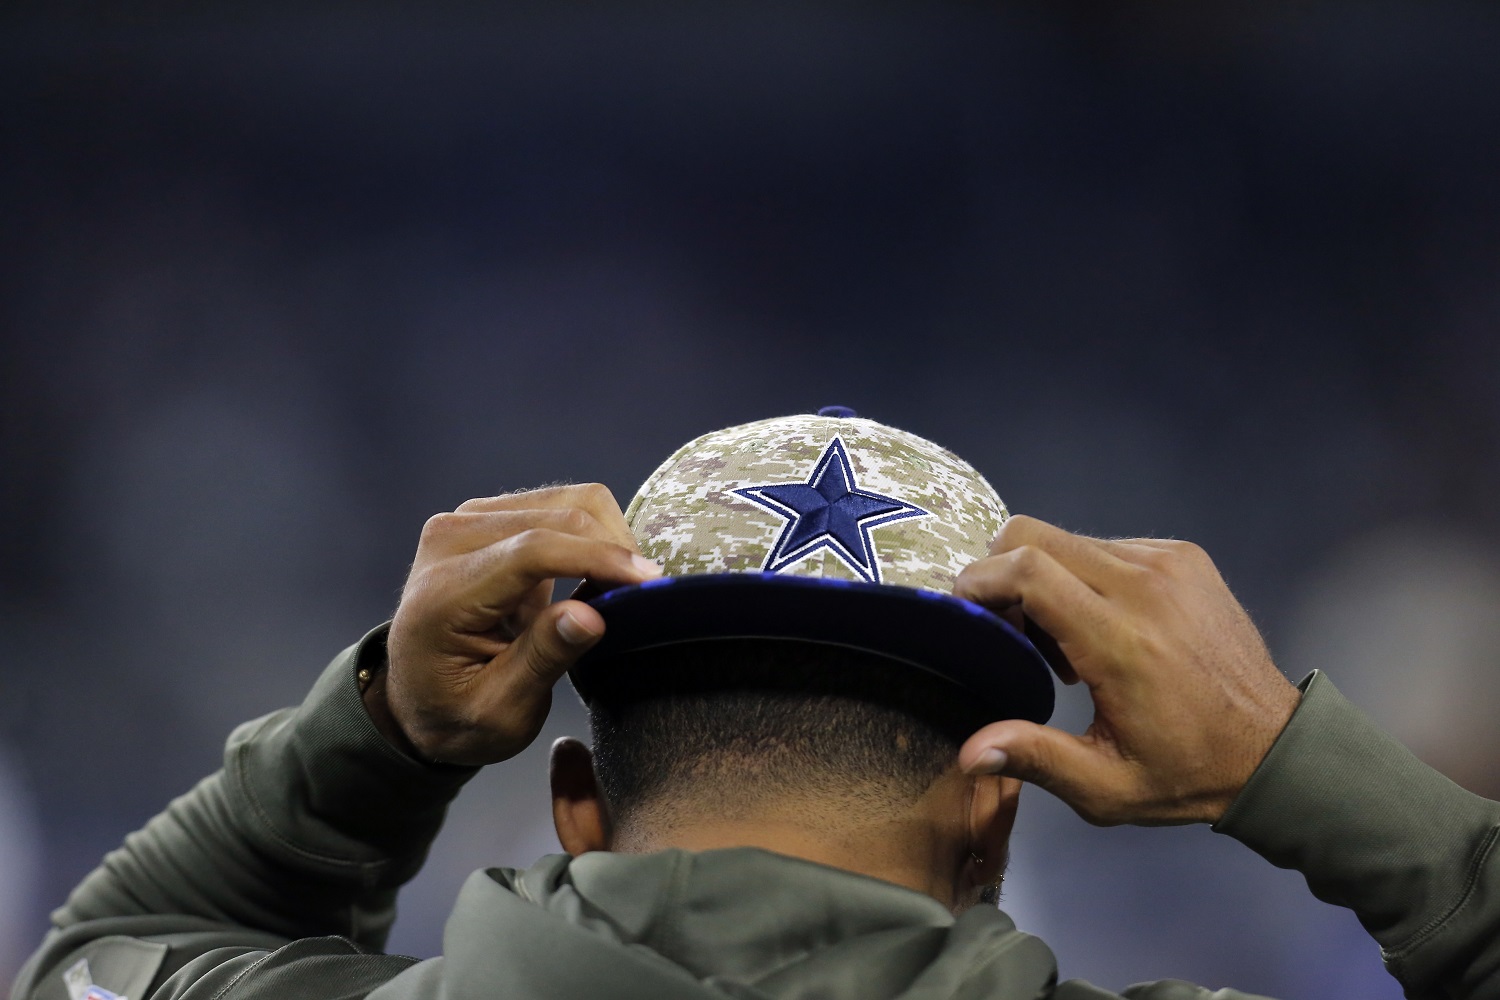 A player puts on a ball cap with the Dallas Cowboys logo in camouflage style before an NFL football game against the Philadelphia Eagles on Sunday, Nov. 8, 2015, in Arlington, Texas. (AP Photo/Brandon Wade)